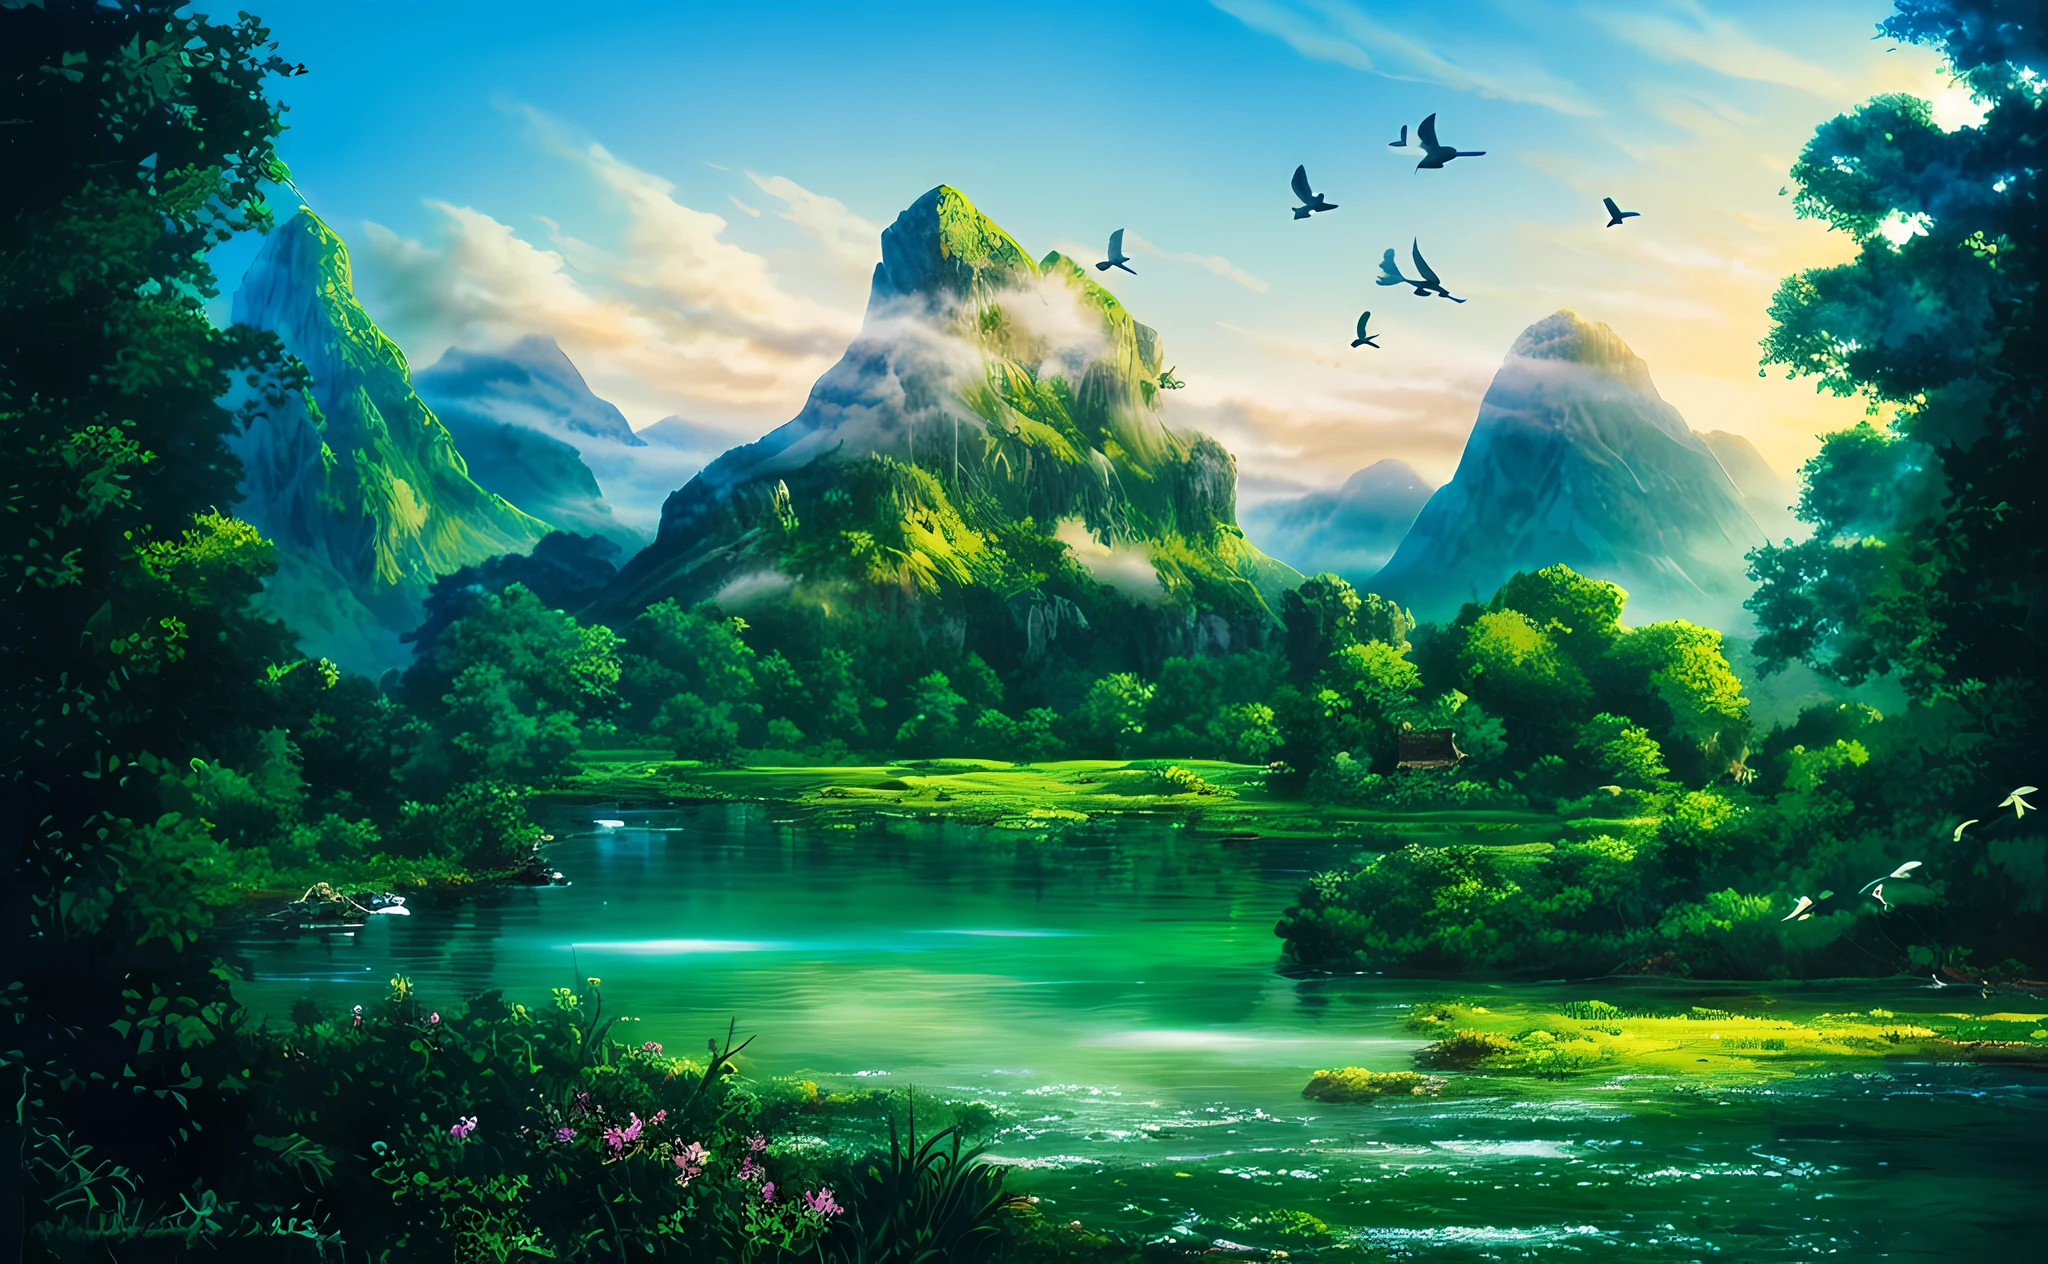 (extremely detailed 8k wallpaper) +, Painting of a mountain scene with a lake and birds flying over it, beautiful mountain background, lakeside mountains, majestic nature scenery, stunning fantasy landscape, dreamlike epic fantasy landscape, highly detailed 4k digital art, fantasy landscape, scenic fantasy, 3D virtual landscape painting,  peaceful landscape, natural landscape beauty, fantasy art landscape, high fantasy landscape